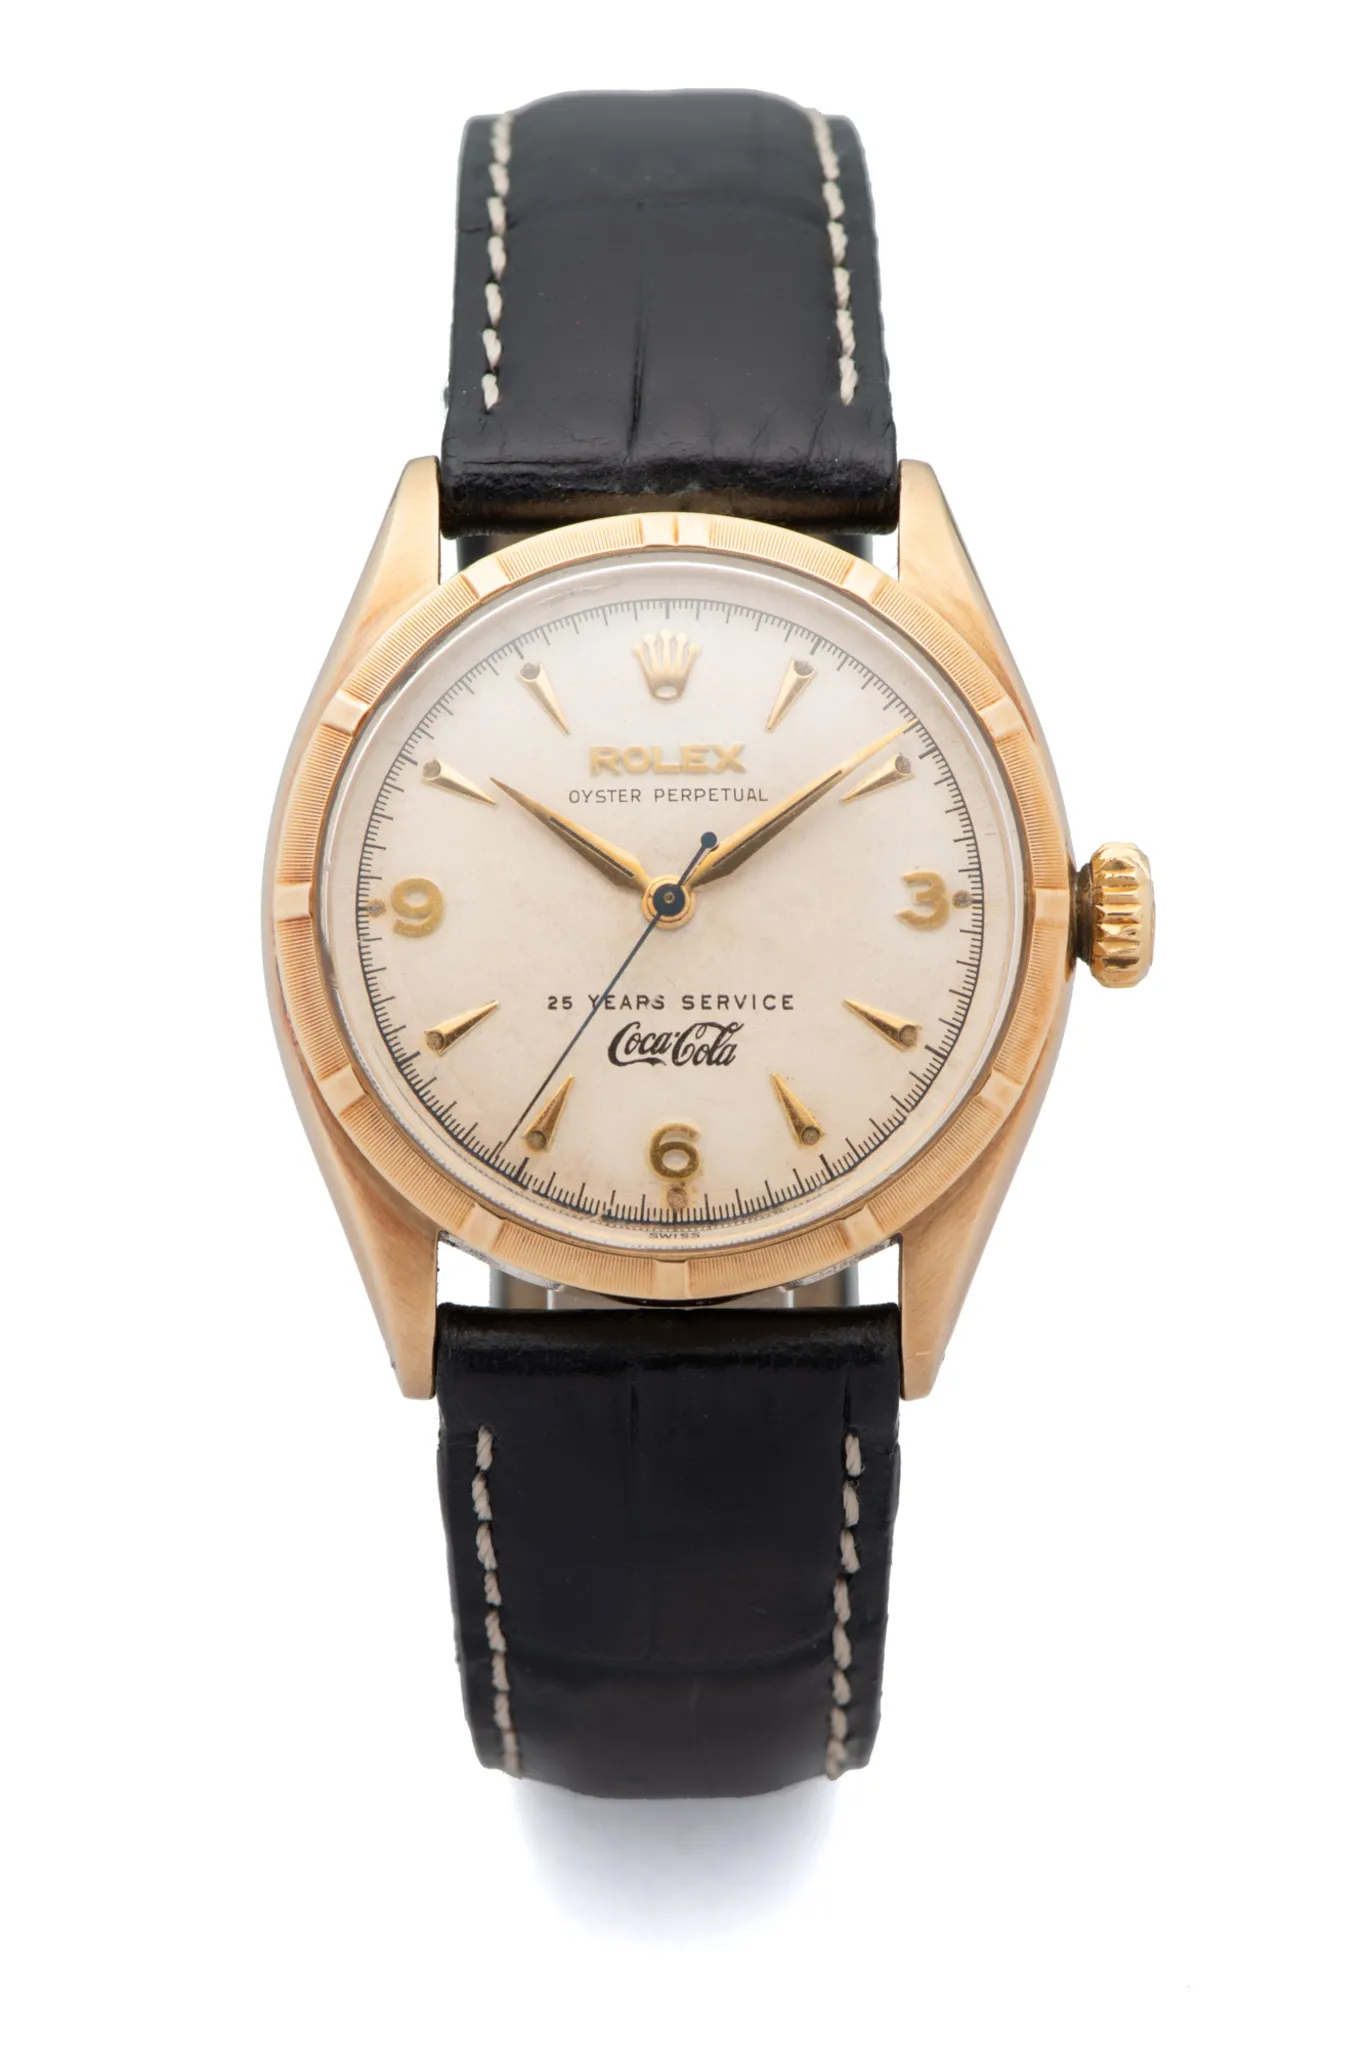 Rolex Oyster Perpetual 6285 34mm Yellow gold Ivory